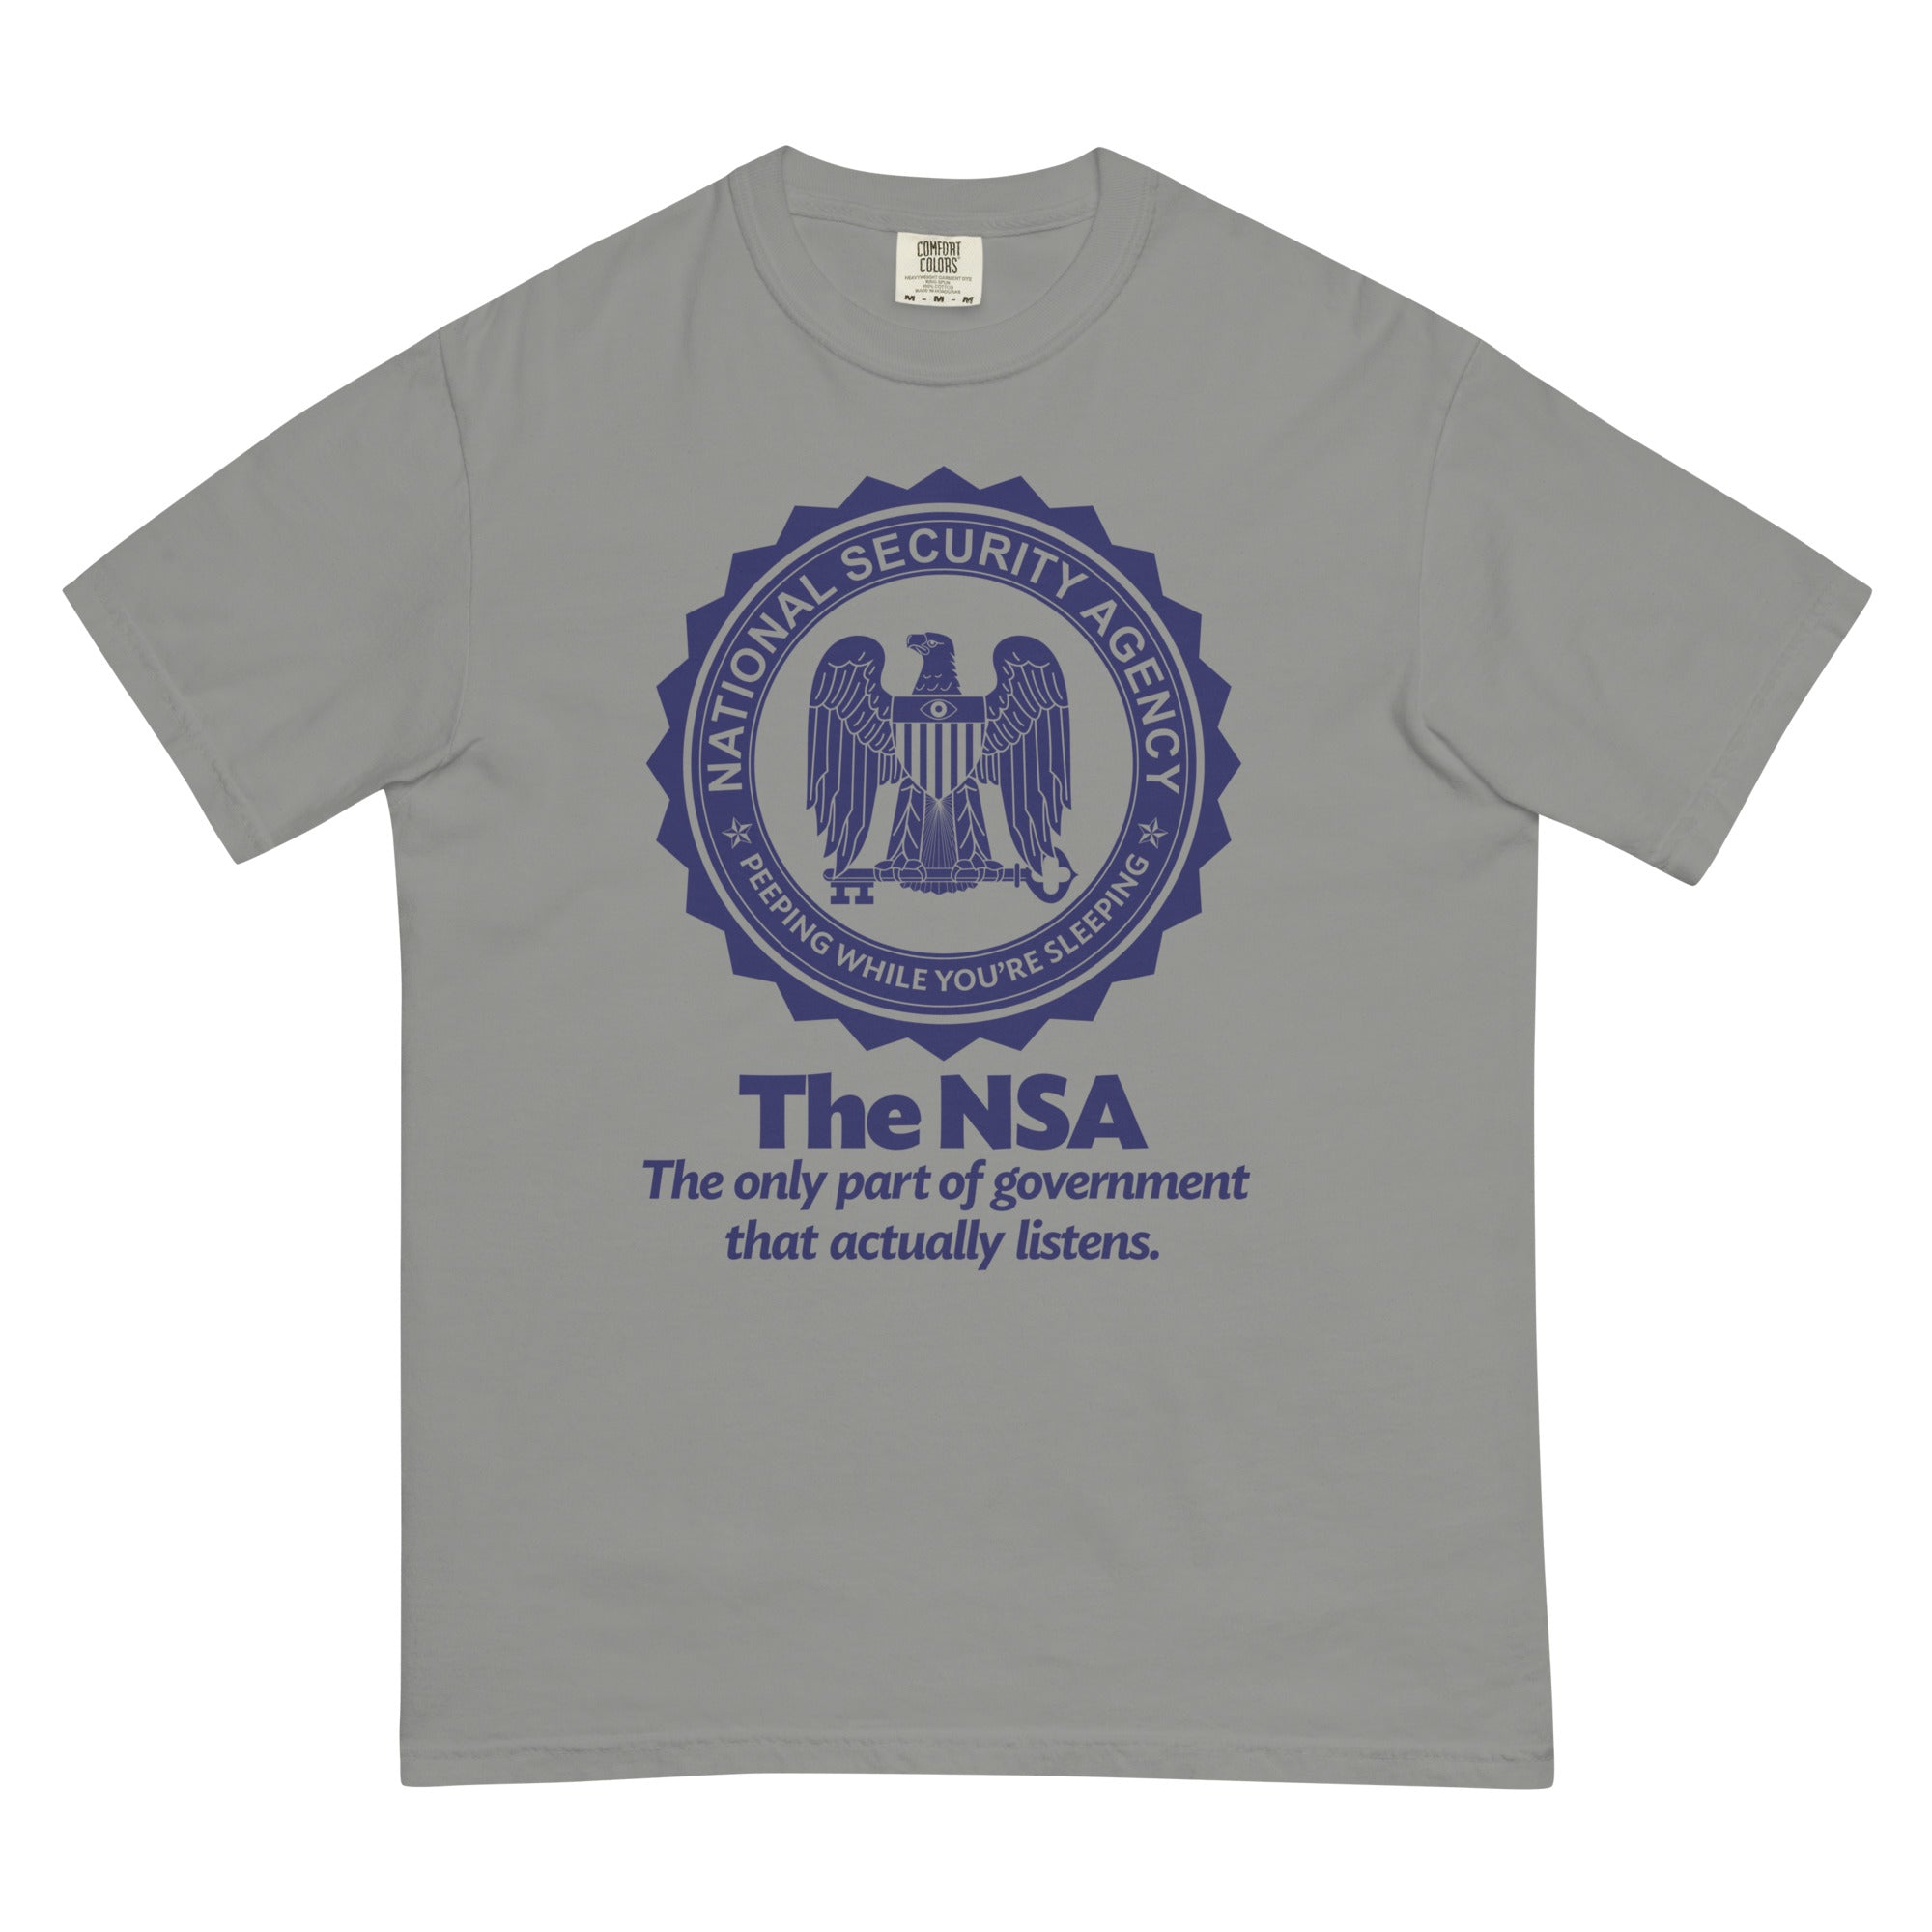 The NSA: The Only Part of Government That Actually Listens Garment-dyed Heavyweight T-Shirt